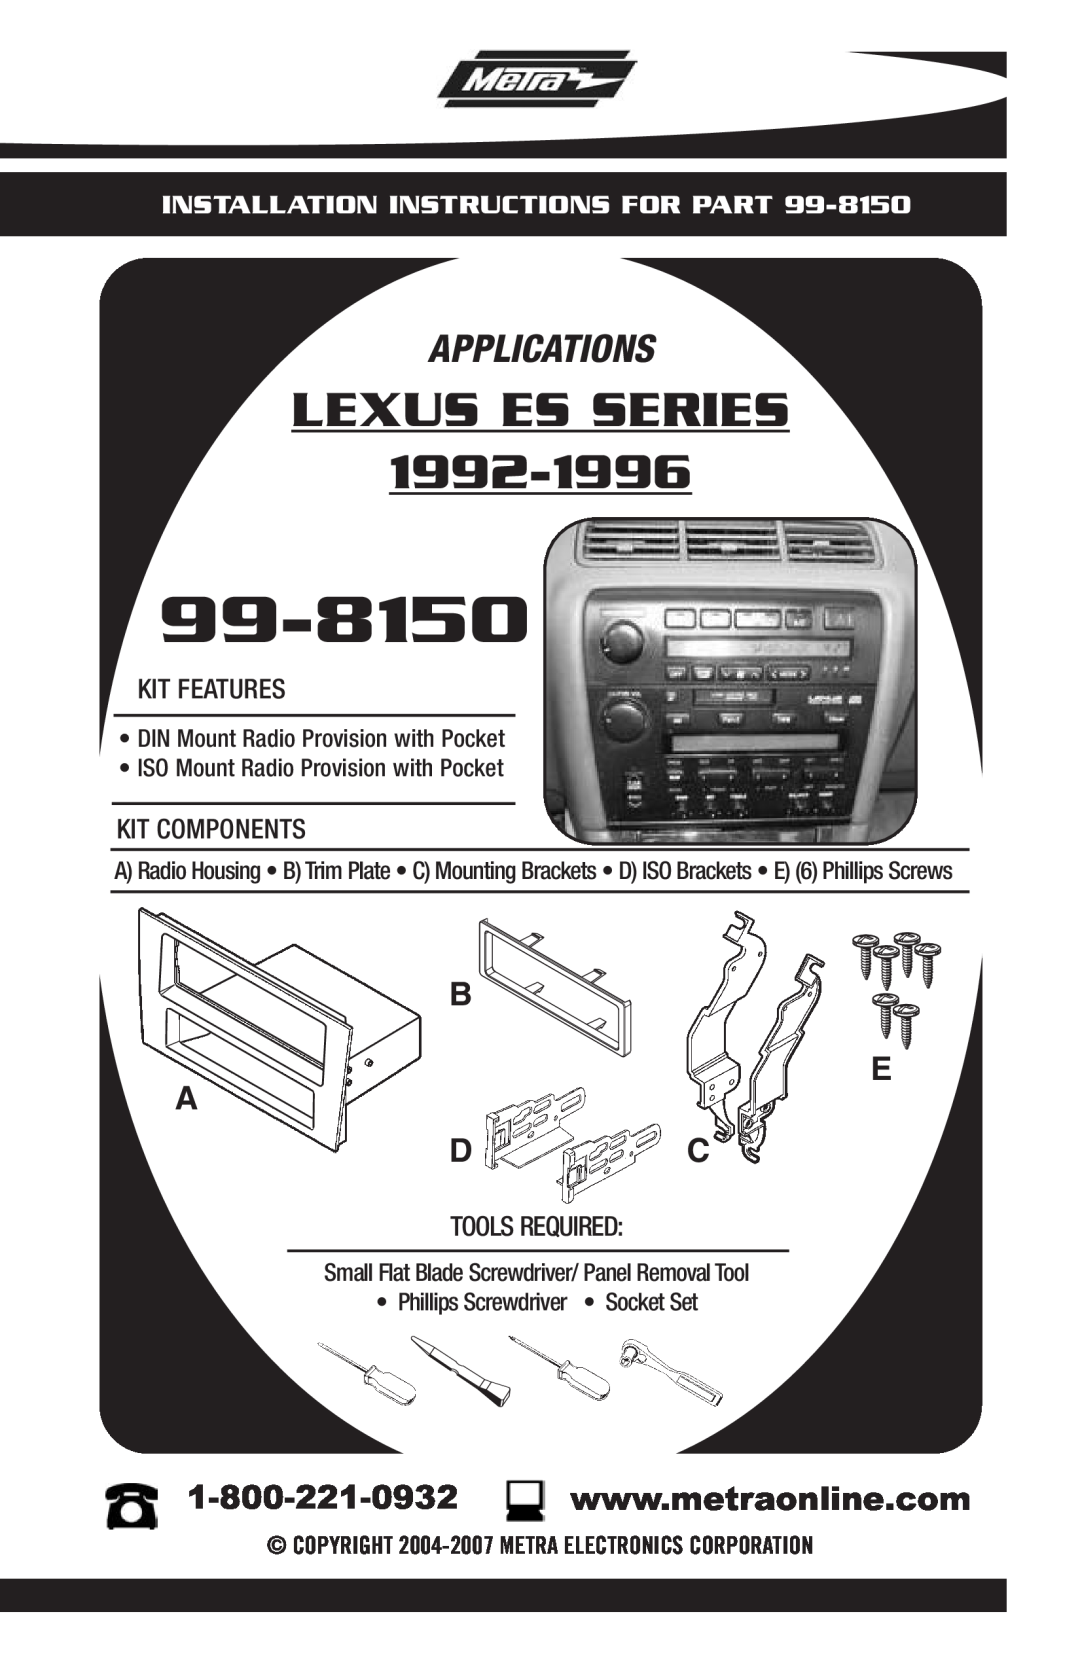 Metra Electronics 99-8150 installation instructions Lexus Es Series, Applications, Installation Instructions For Part 